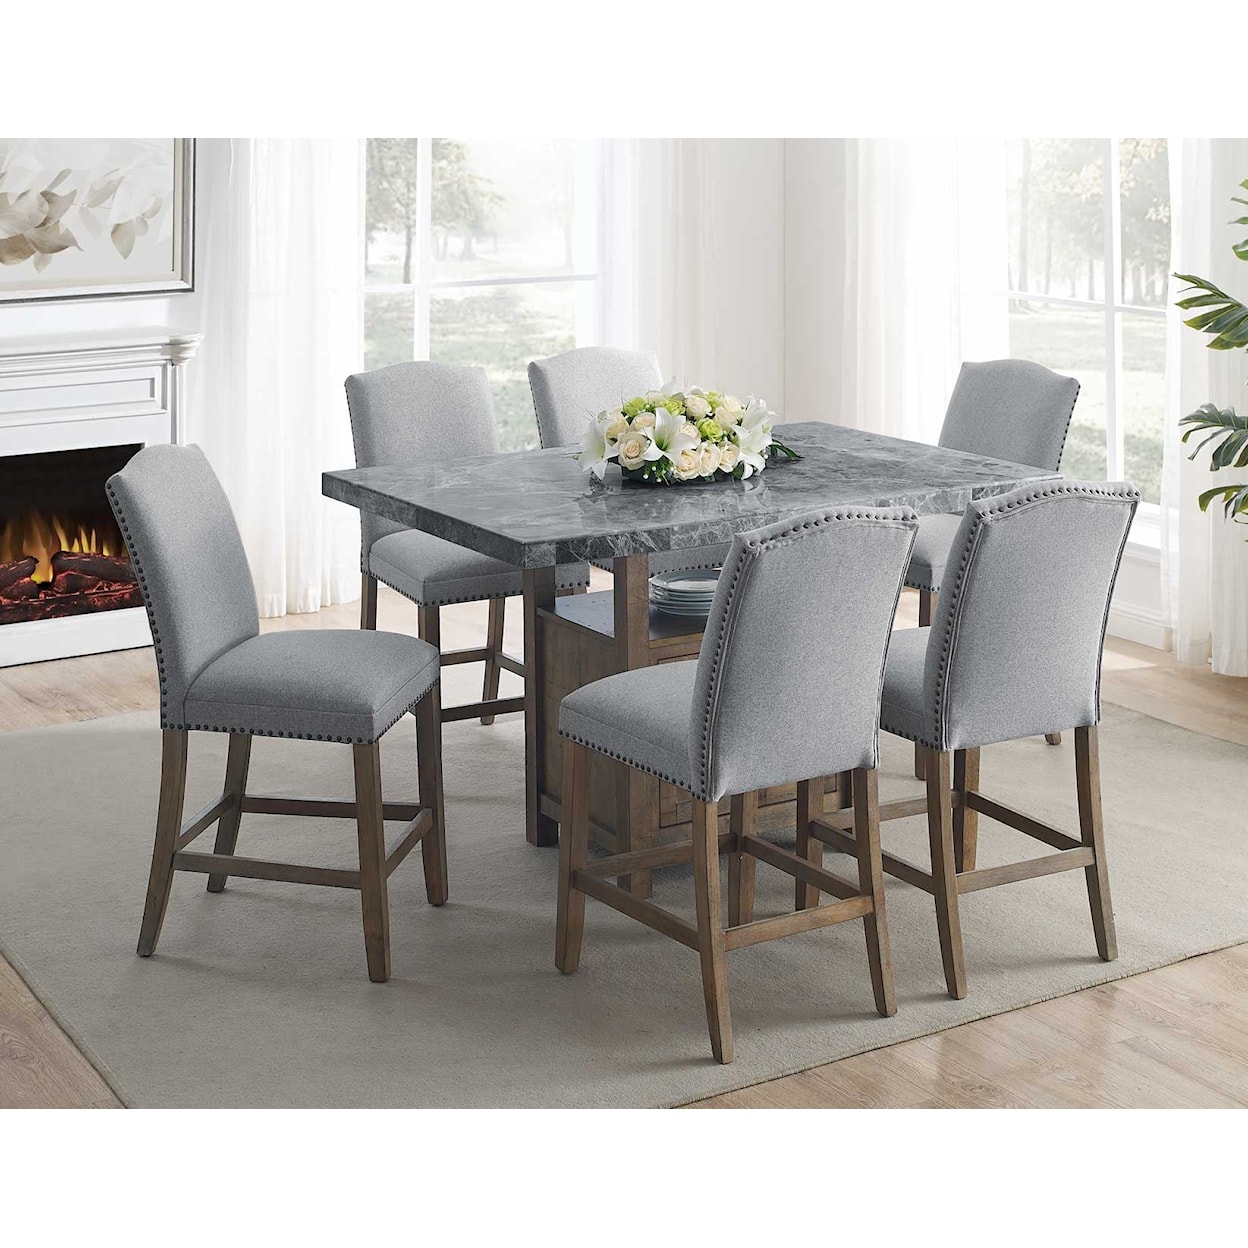 Prime Grayson 5-Piece Counter-Height Dining Set